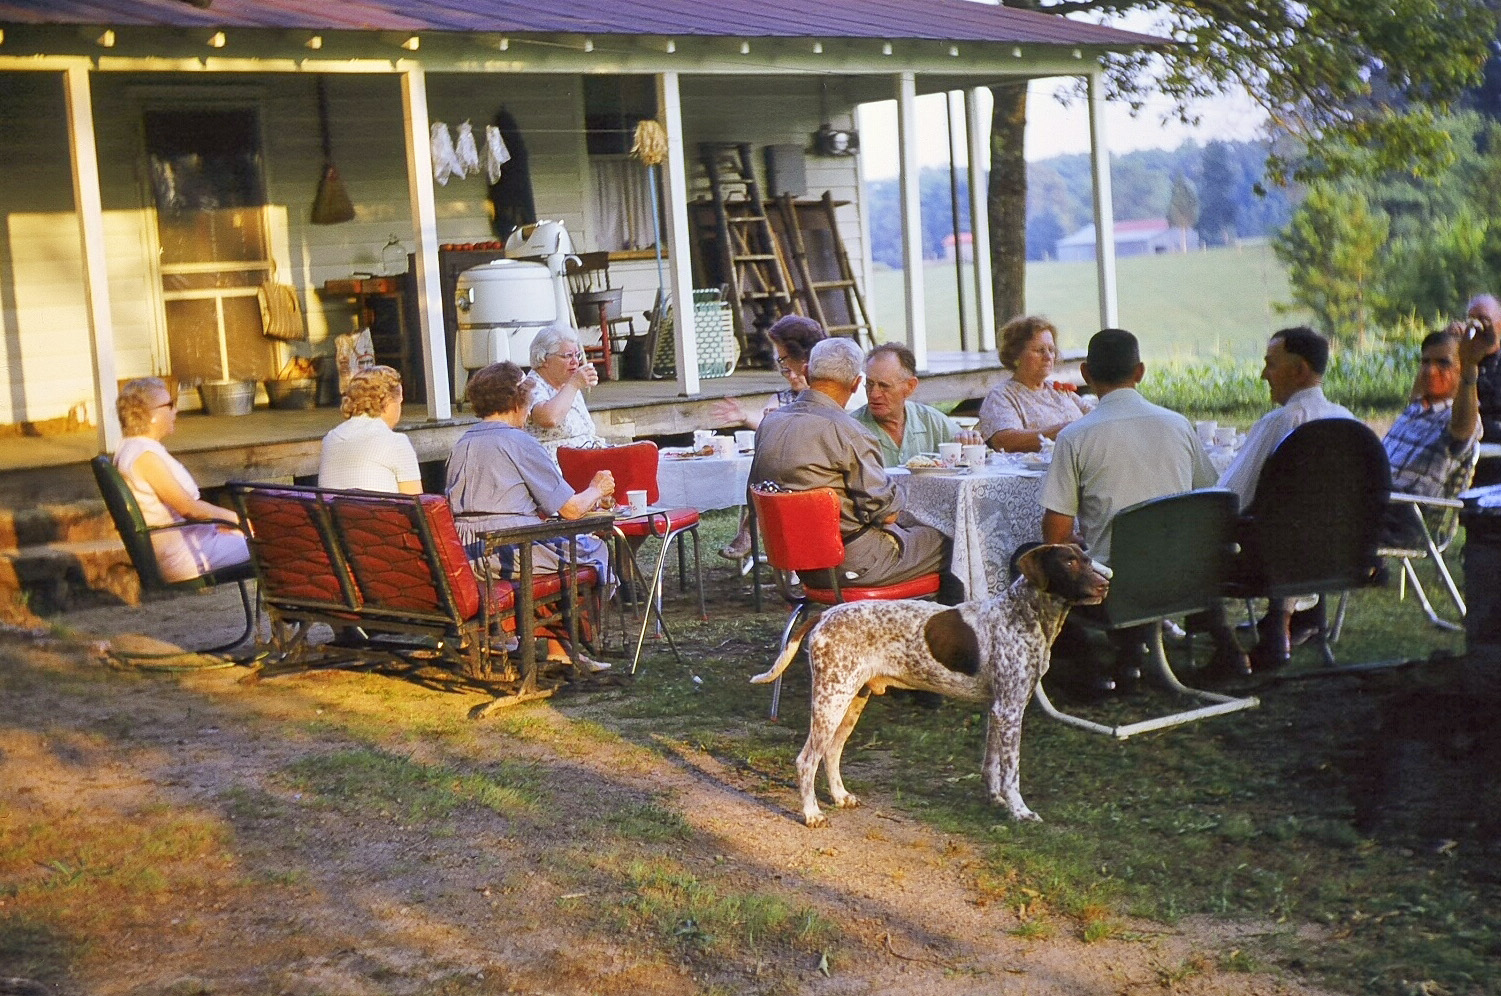 Amelia County, Virginia, in the early 1960s. Sunday dinner at the Miller house, with the farm of Marvin and Thelma Warriner in the background. Photo by Helen Warriner-Burke. View full size.